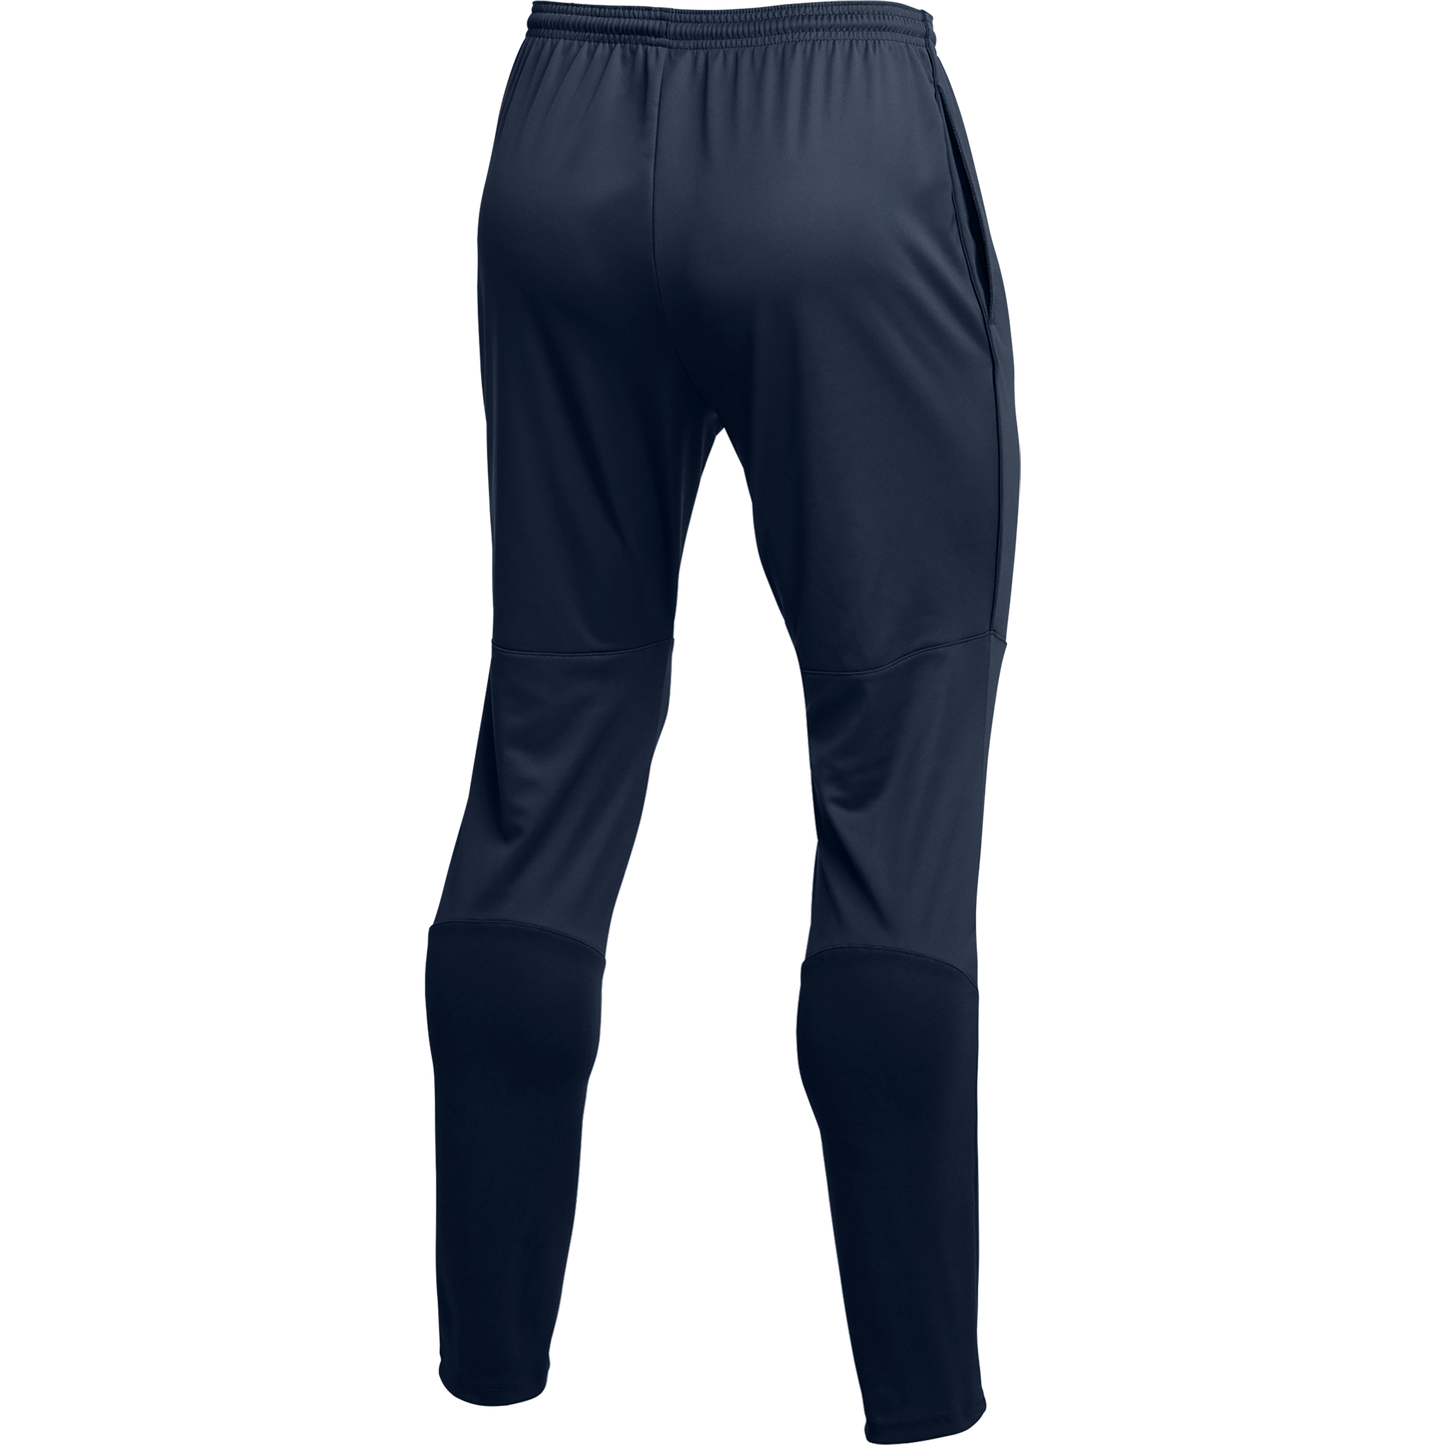 LEVIN AFC PARK 20 PANT - YOUTH'S